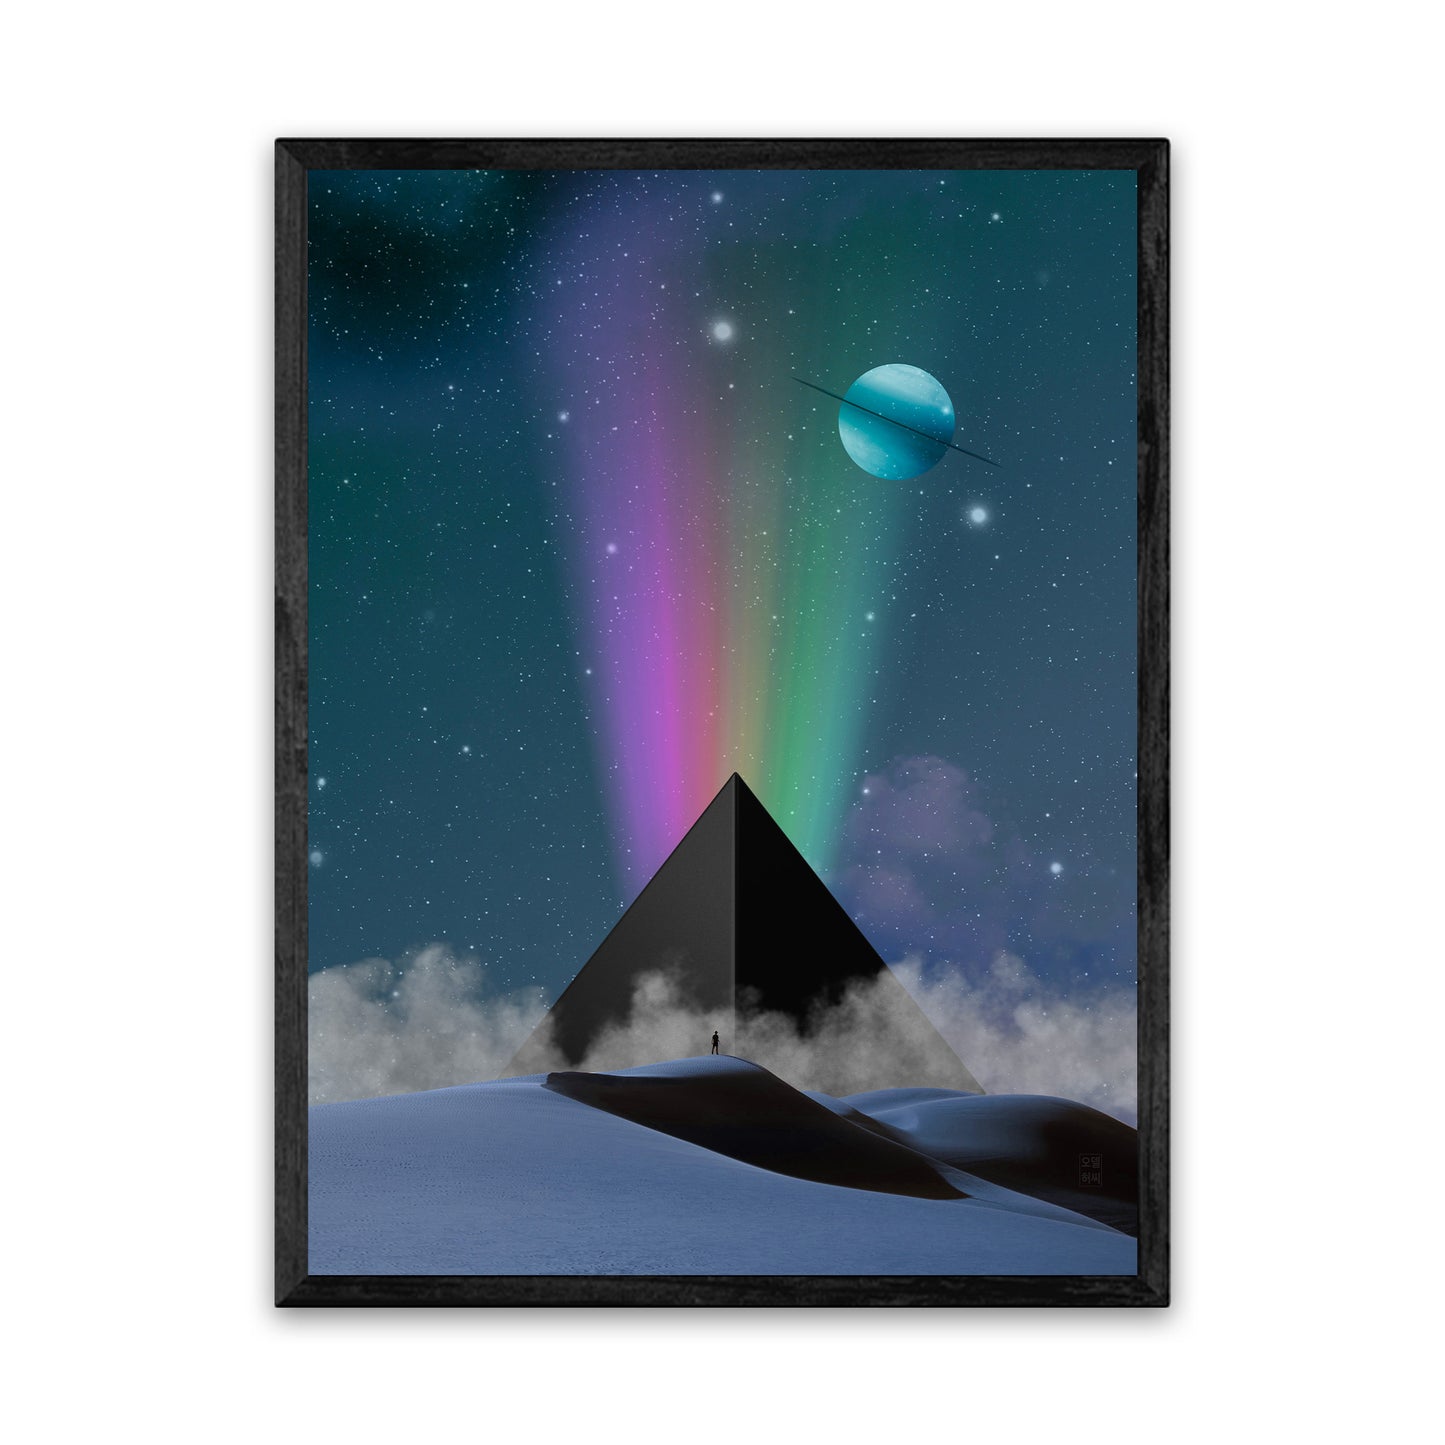 Blue Dunes Pyramid 18X24 Inch Poster Print for Pyramid & Surreal Art Fans, great gift for home decor and room design.